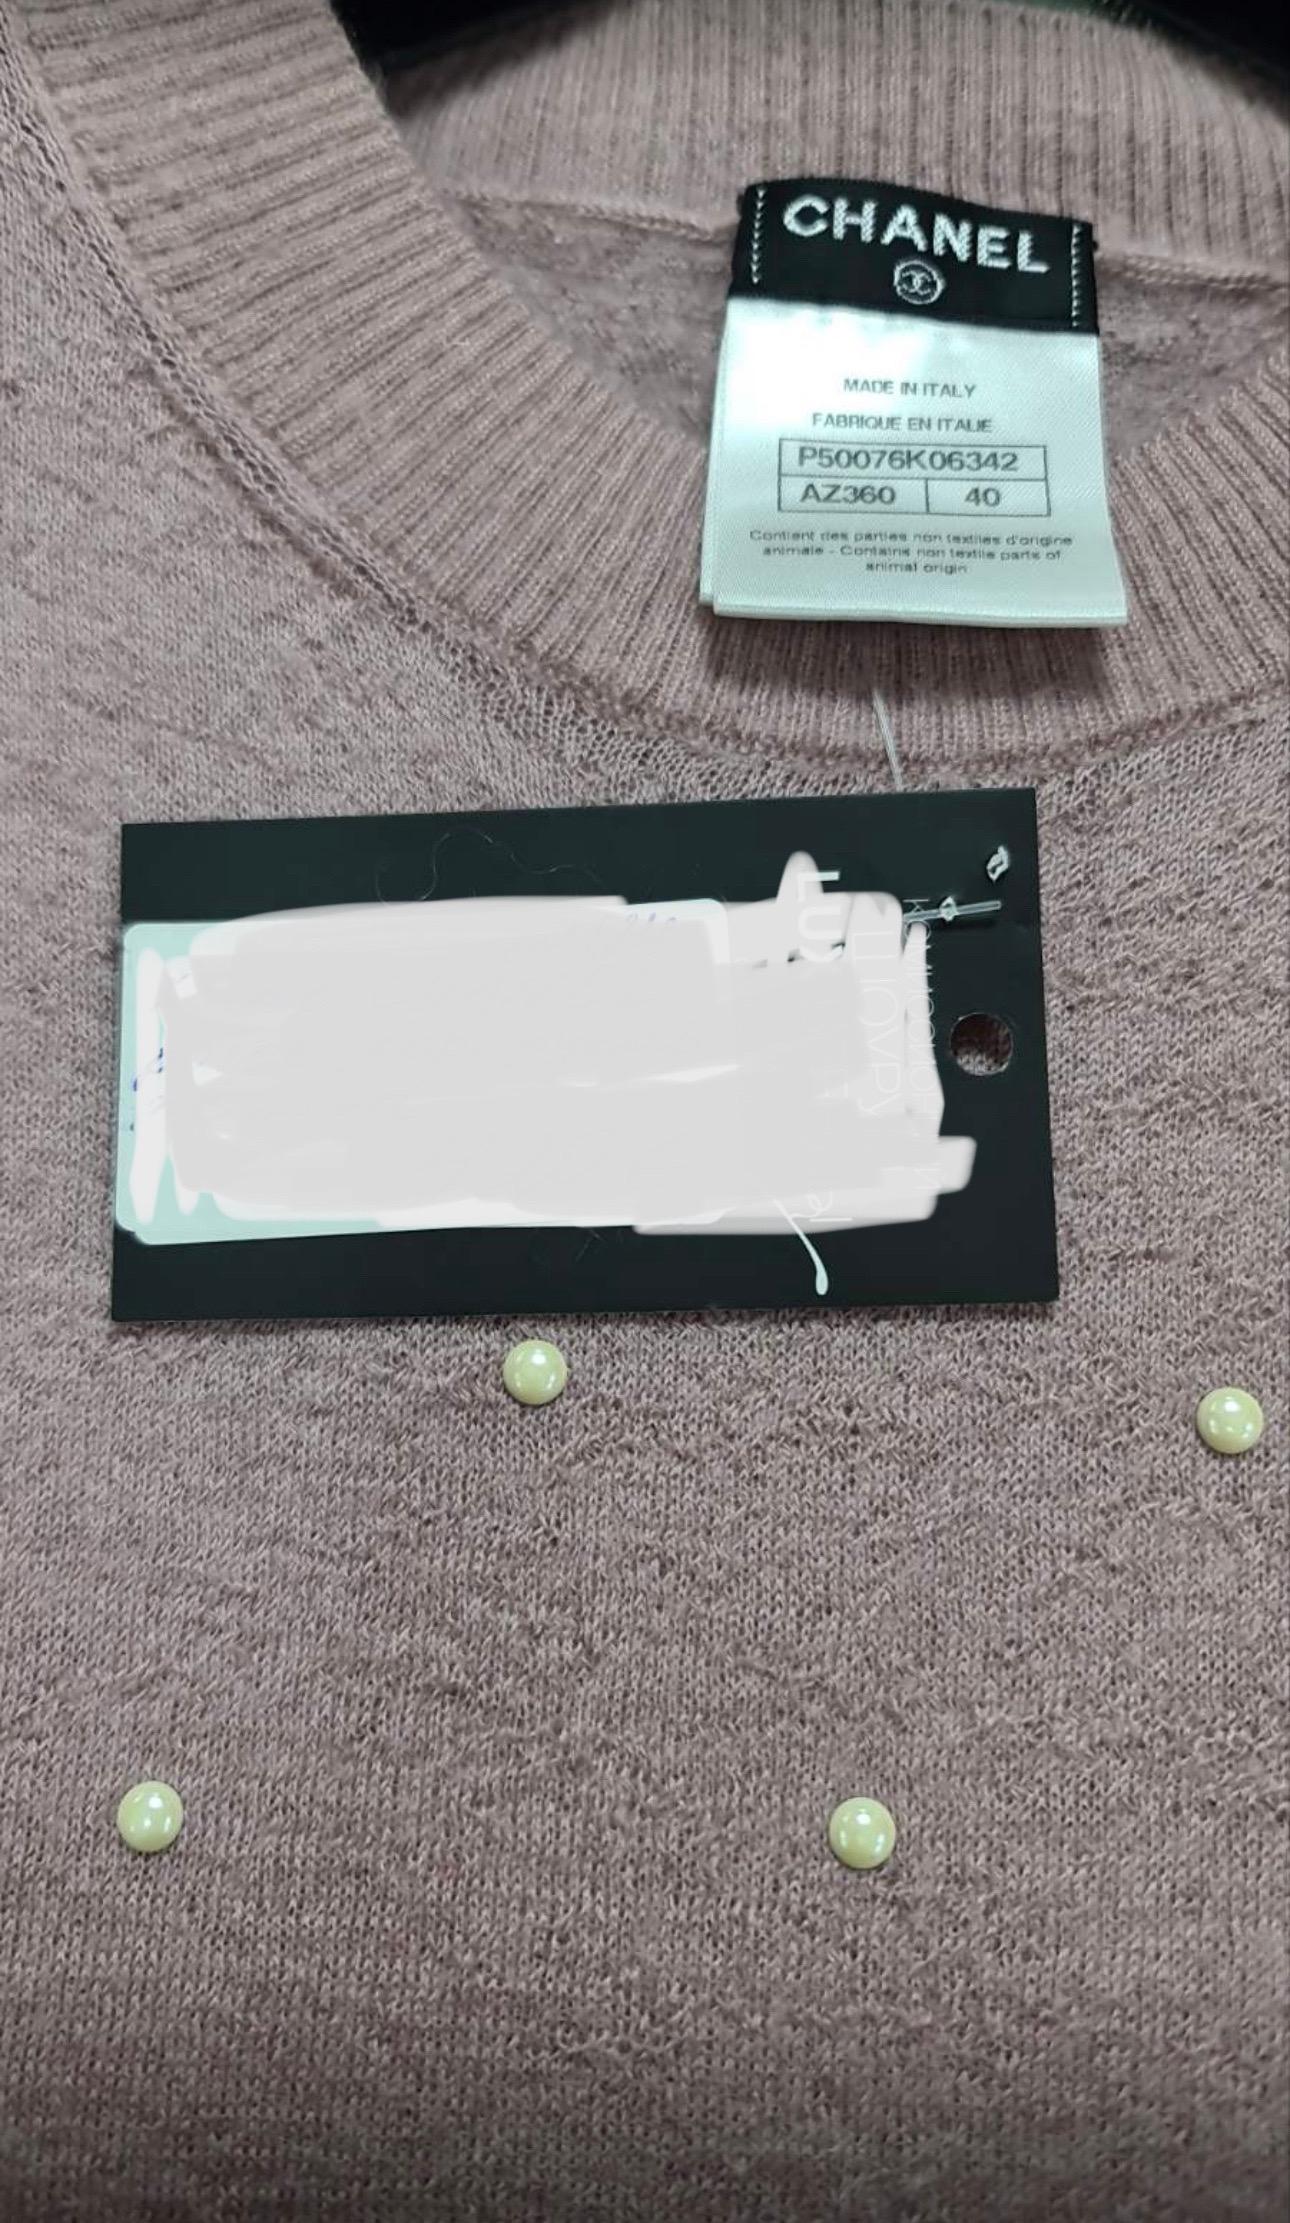 Chanel Pink Cashmer Pearl Top In Good Condition For Sale In Krakow, PL